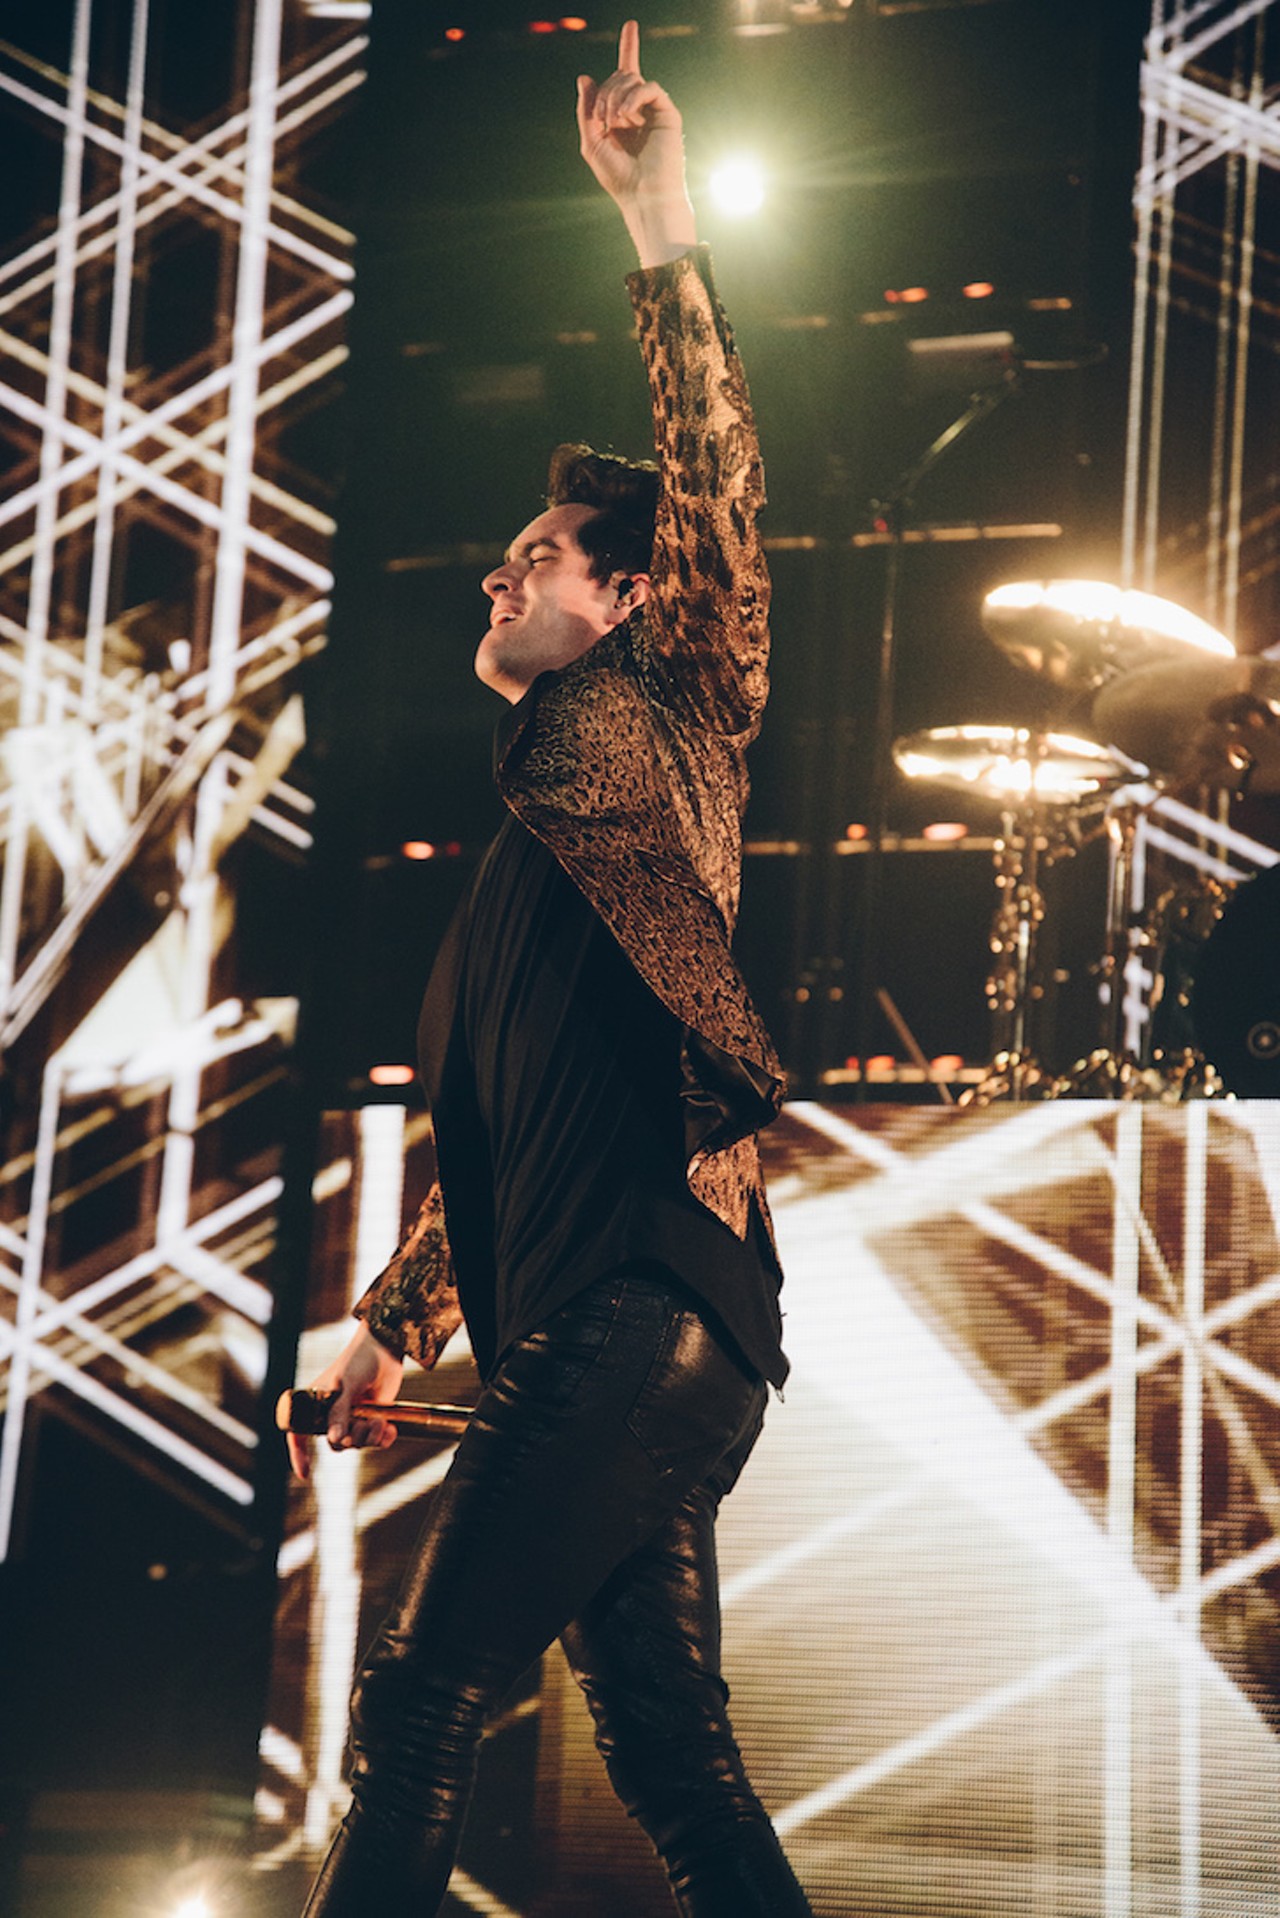 Photos from Panic at the Disco, Saint Motel, Misterwives at the Amway Center